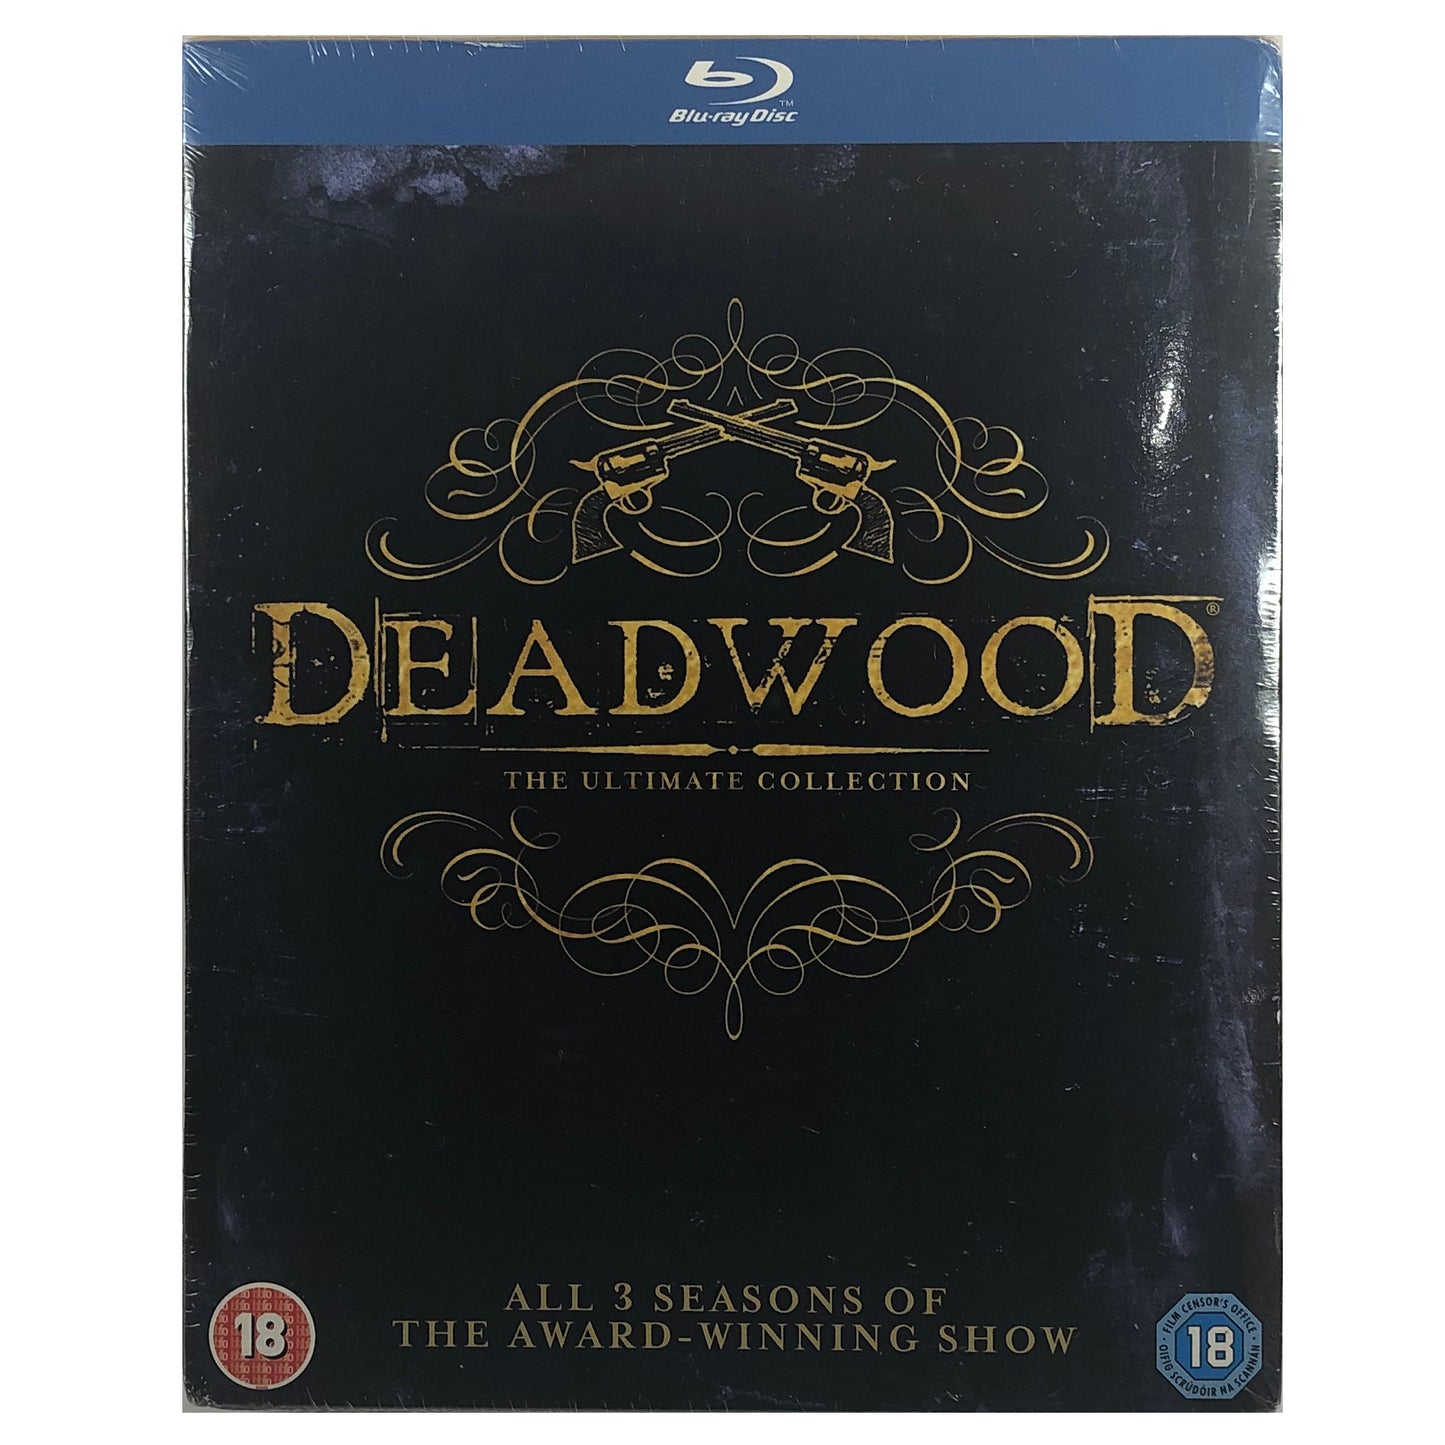 Deadwood - The Ultimate Collection Blu-Ray Box Set